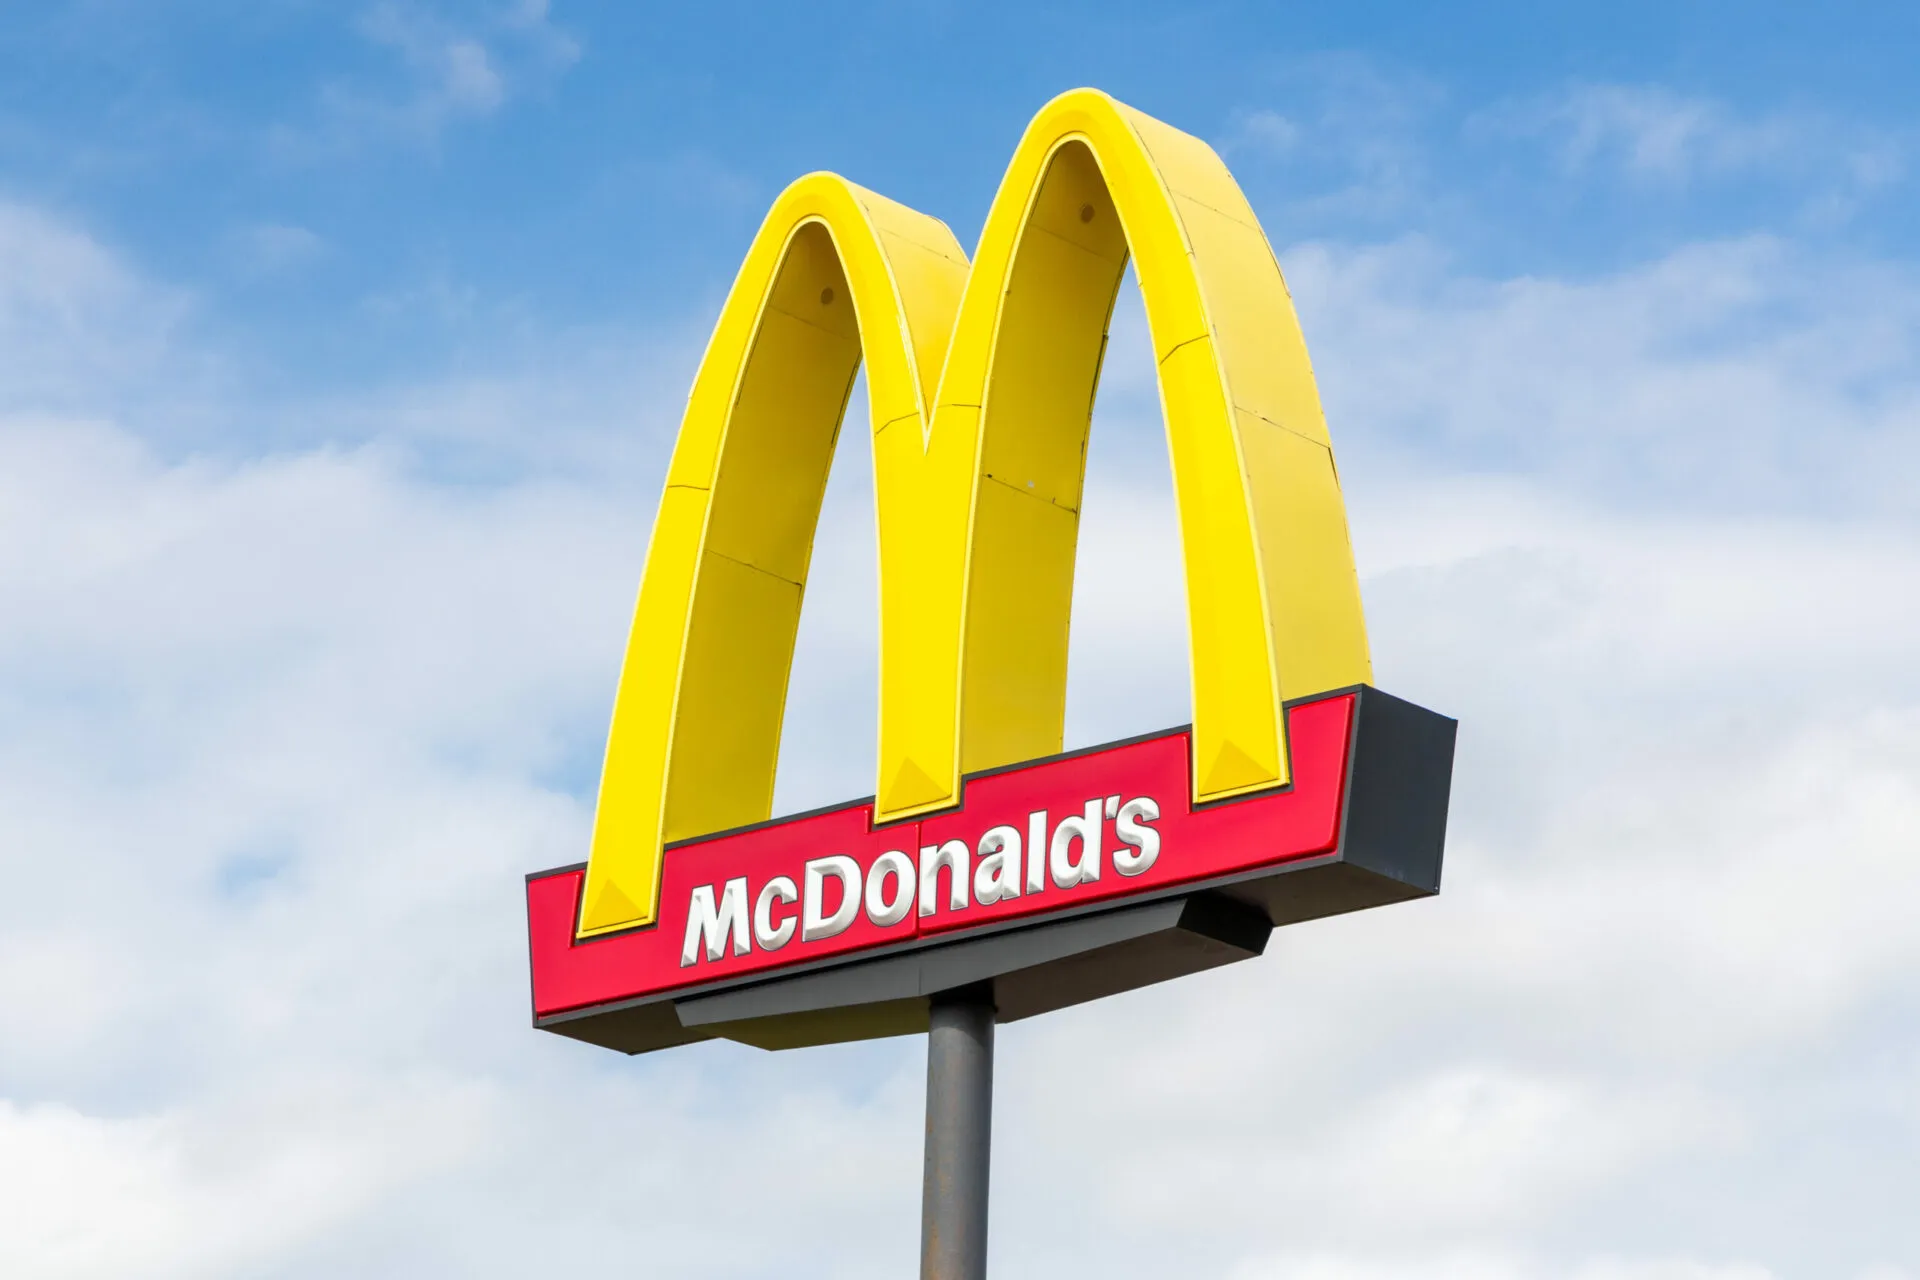 A mcdonald 's sign with the word 